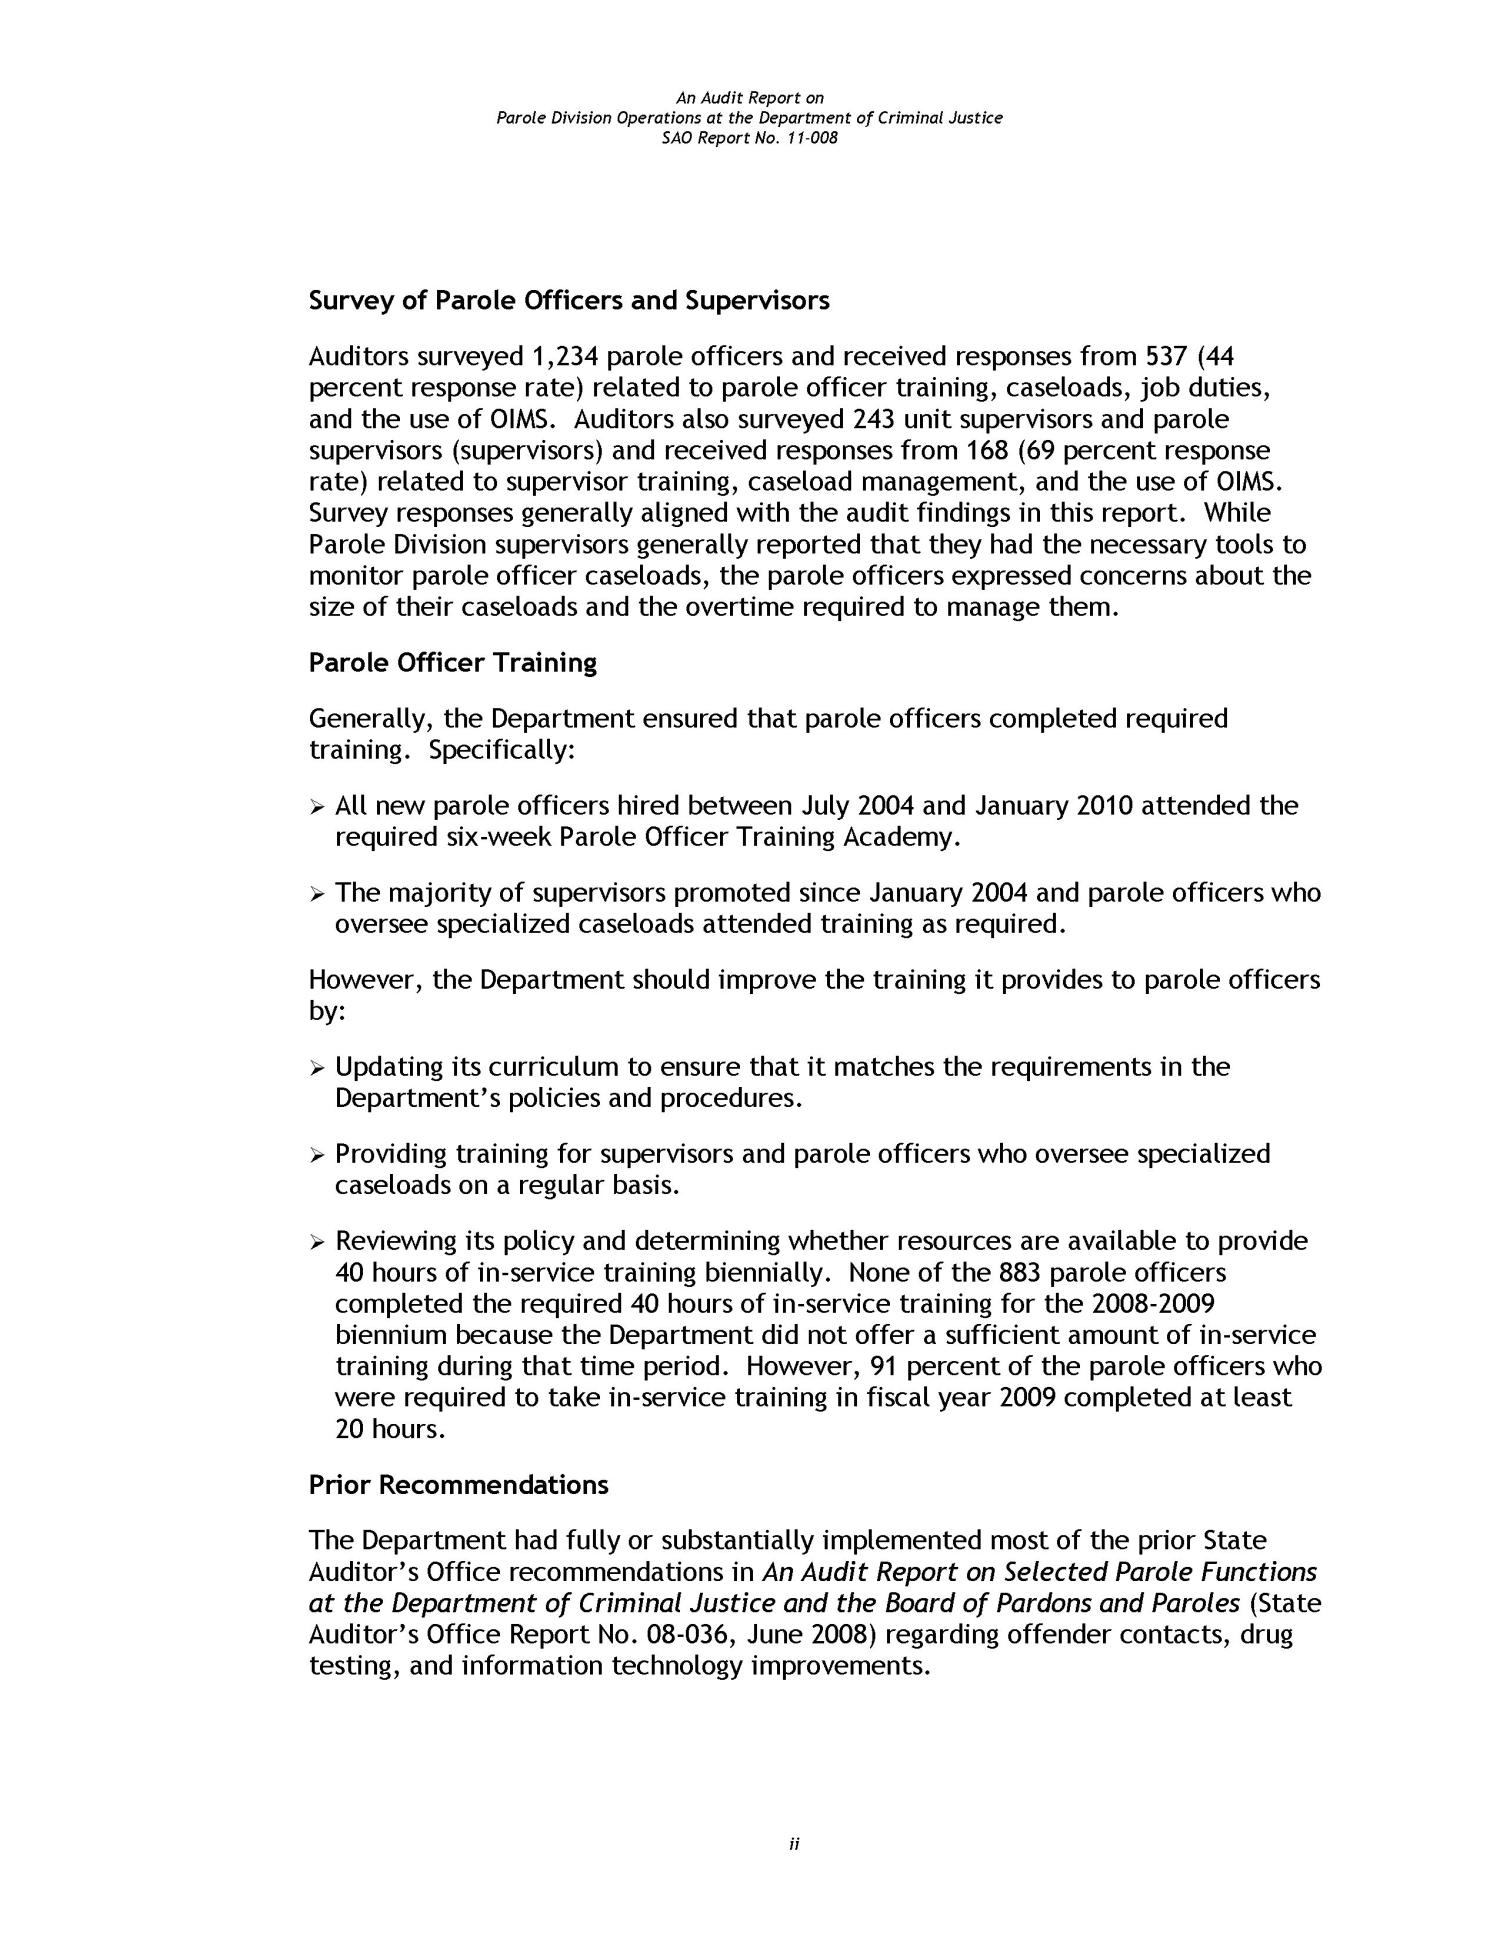 An Audit Report on Parole Division Operations at the Department of Criminal Justice
                                                
                                                    [Sequence #]: 3 of 43
                                                